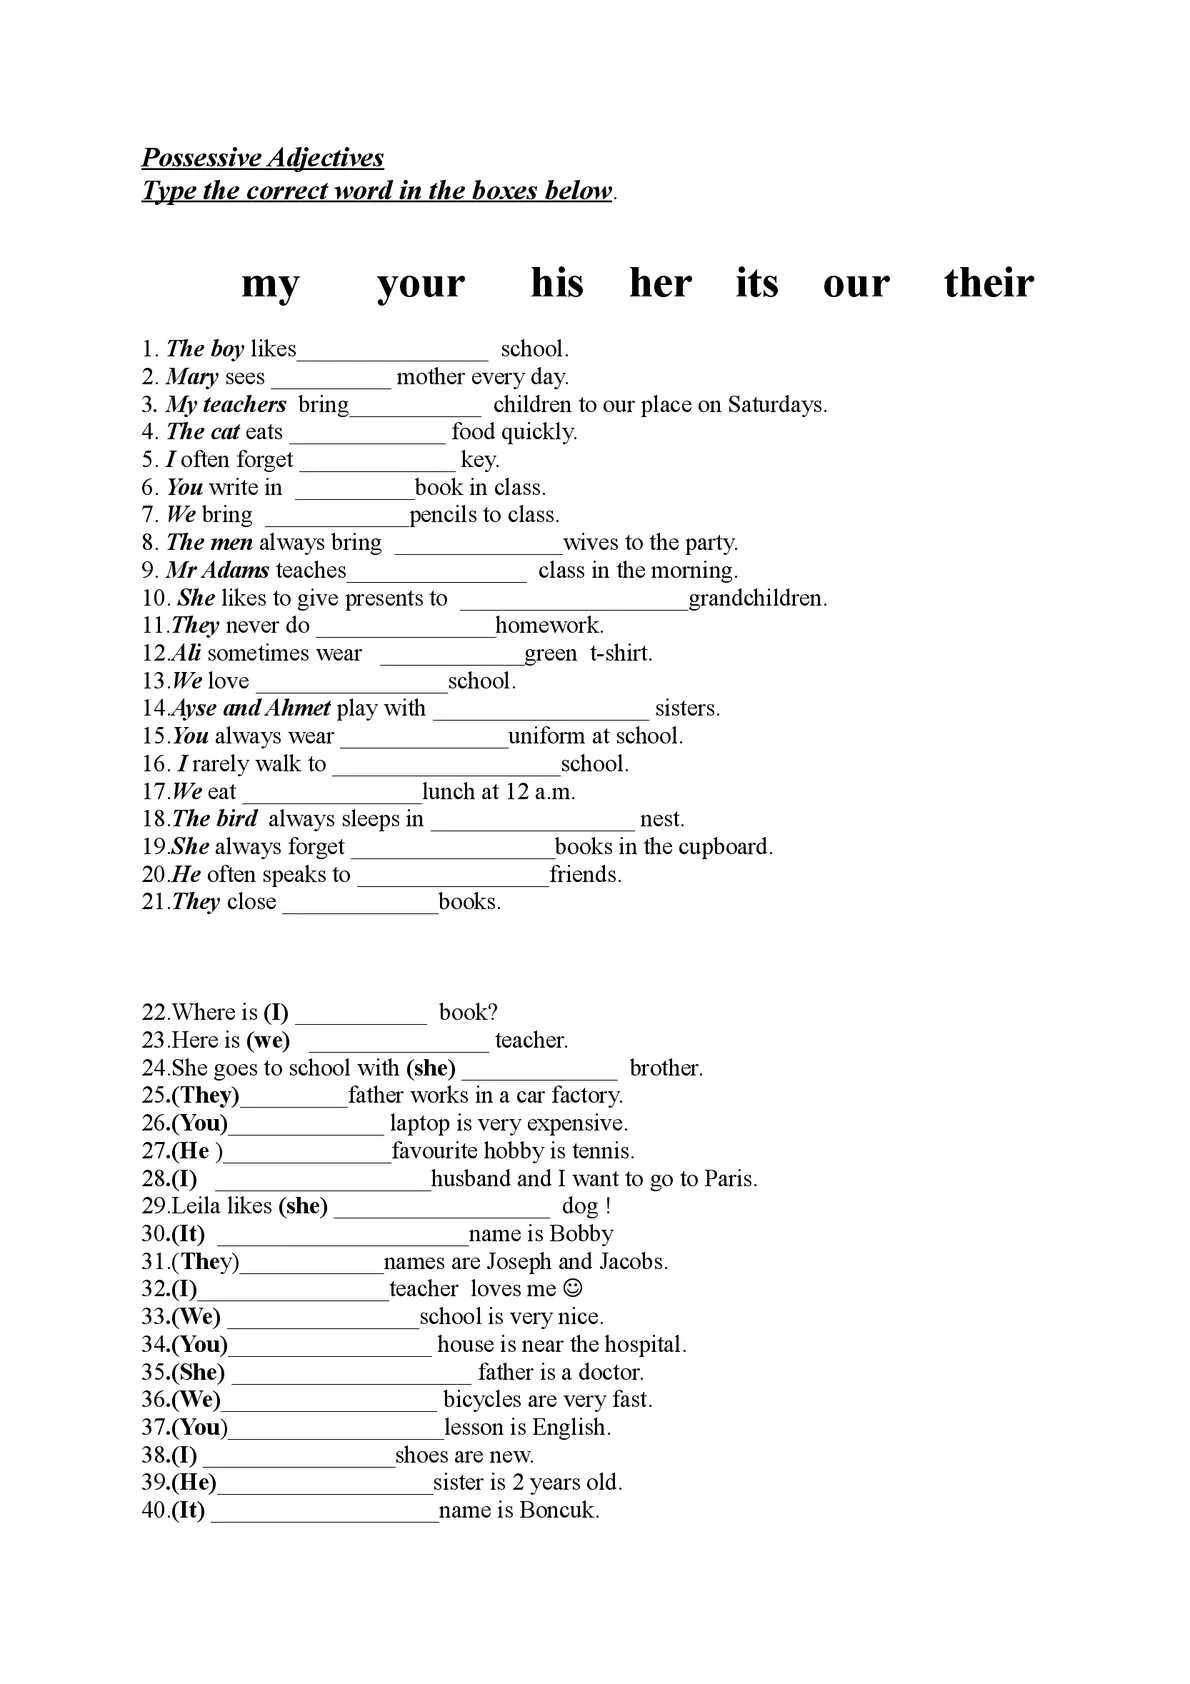 Possessive pronouns Worksheets. Possessive adjectives Worksheets. Possessive adjectives and pronouns упражнения. Possessive adjectives Type the correct Word in the Boxes below ответы.